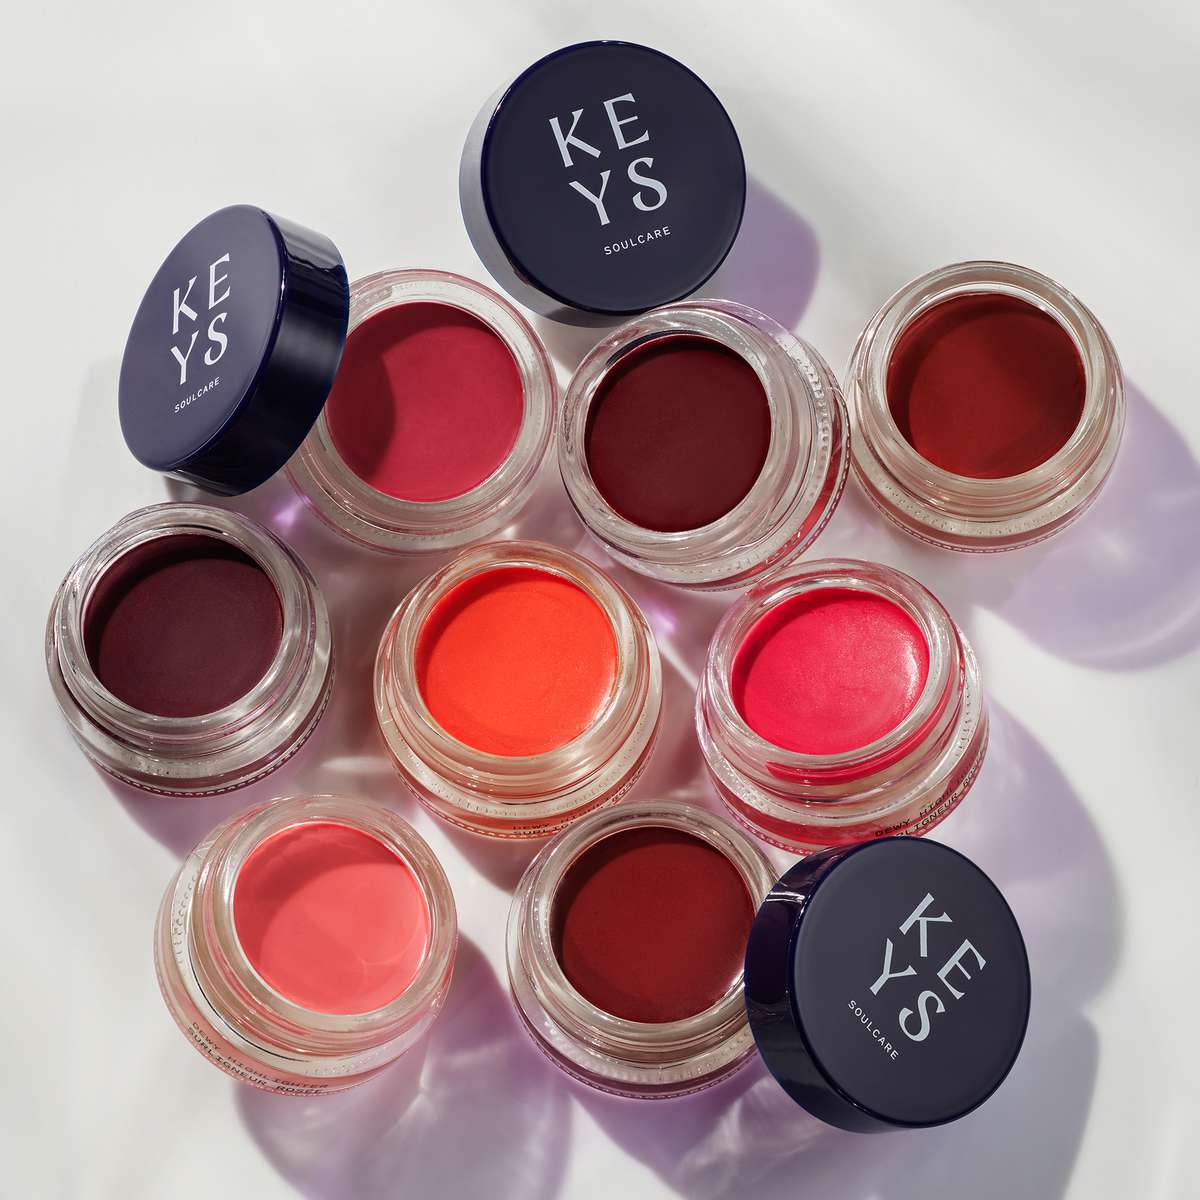 Keys Soulcare's Latest Launch Are the Perfect Makeup Offerings for People Who Hate Makeup